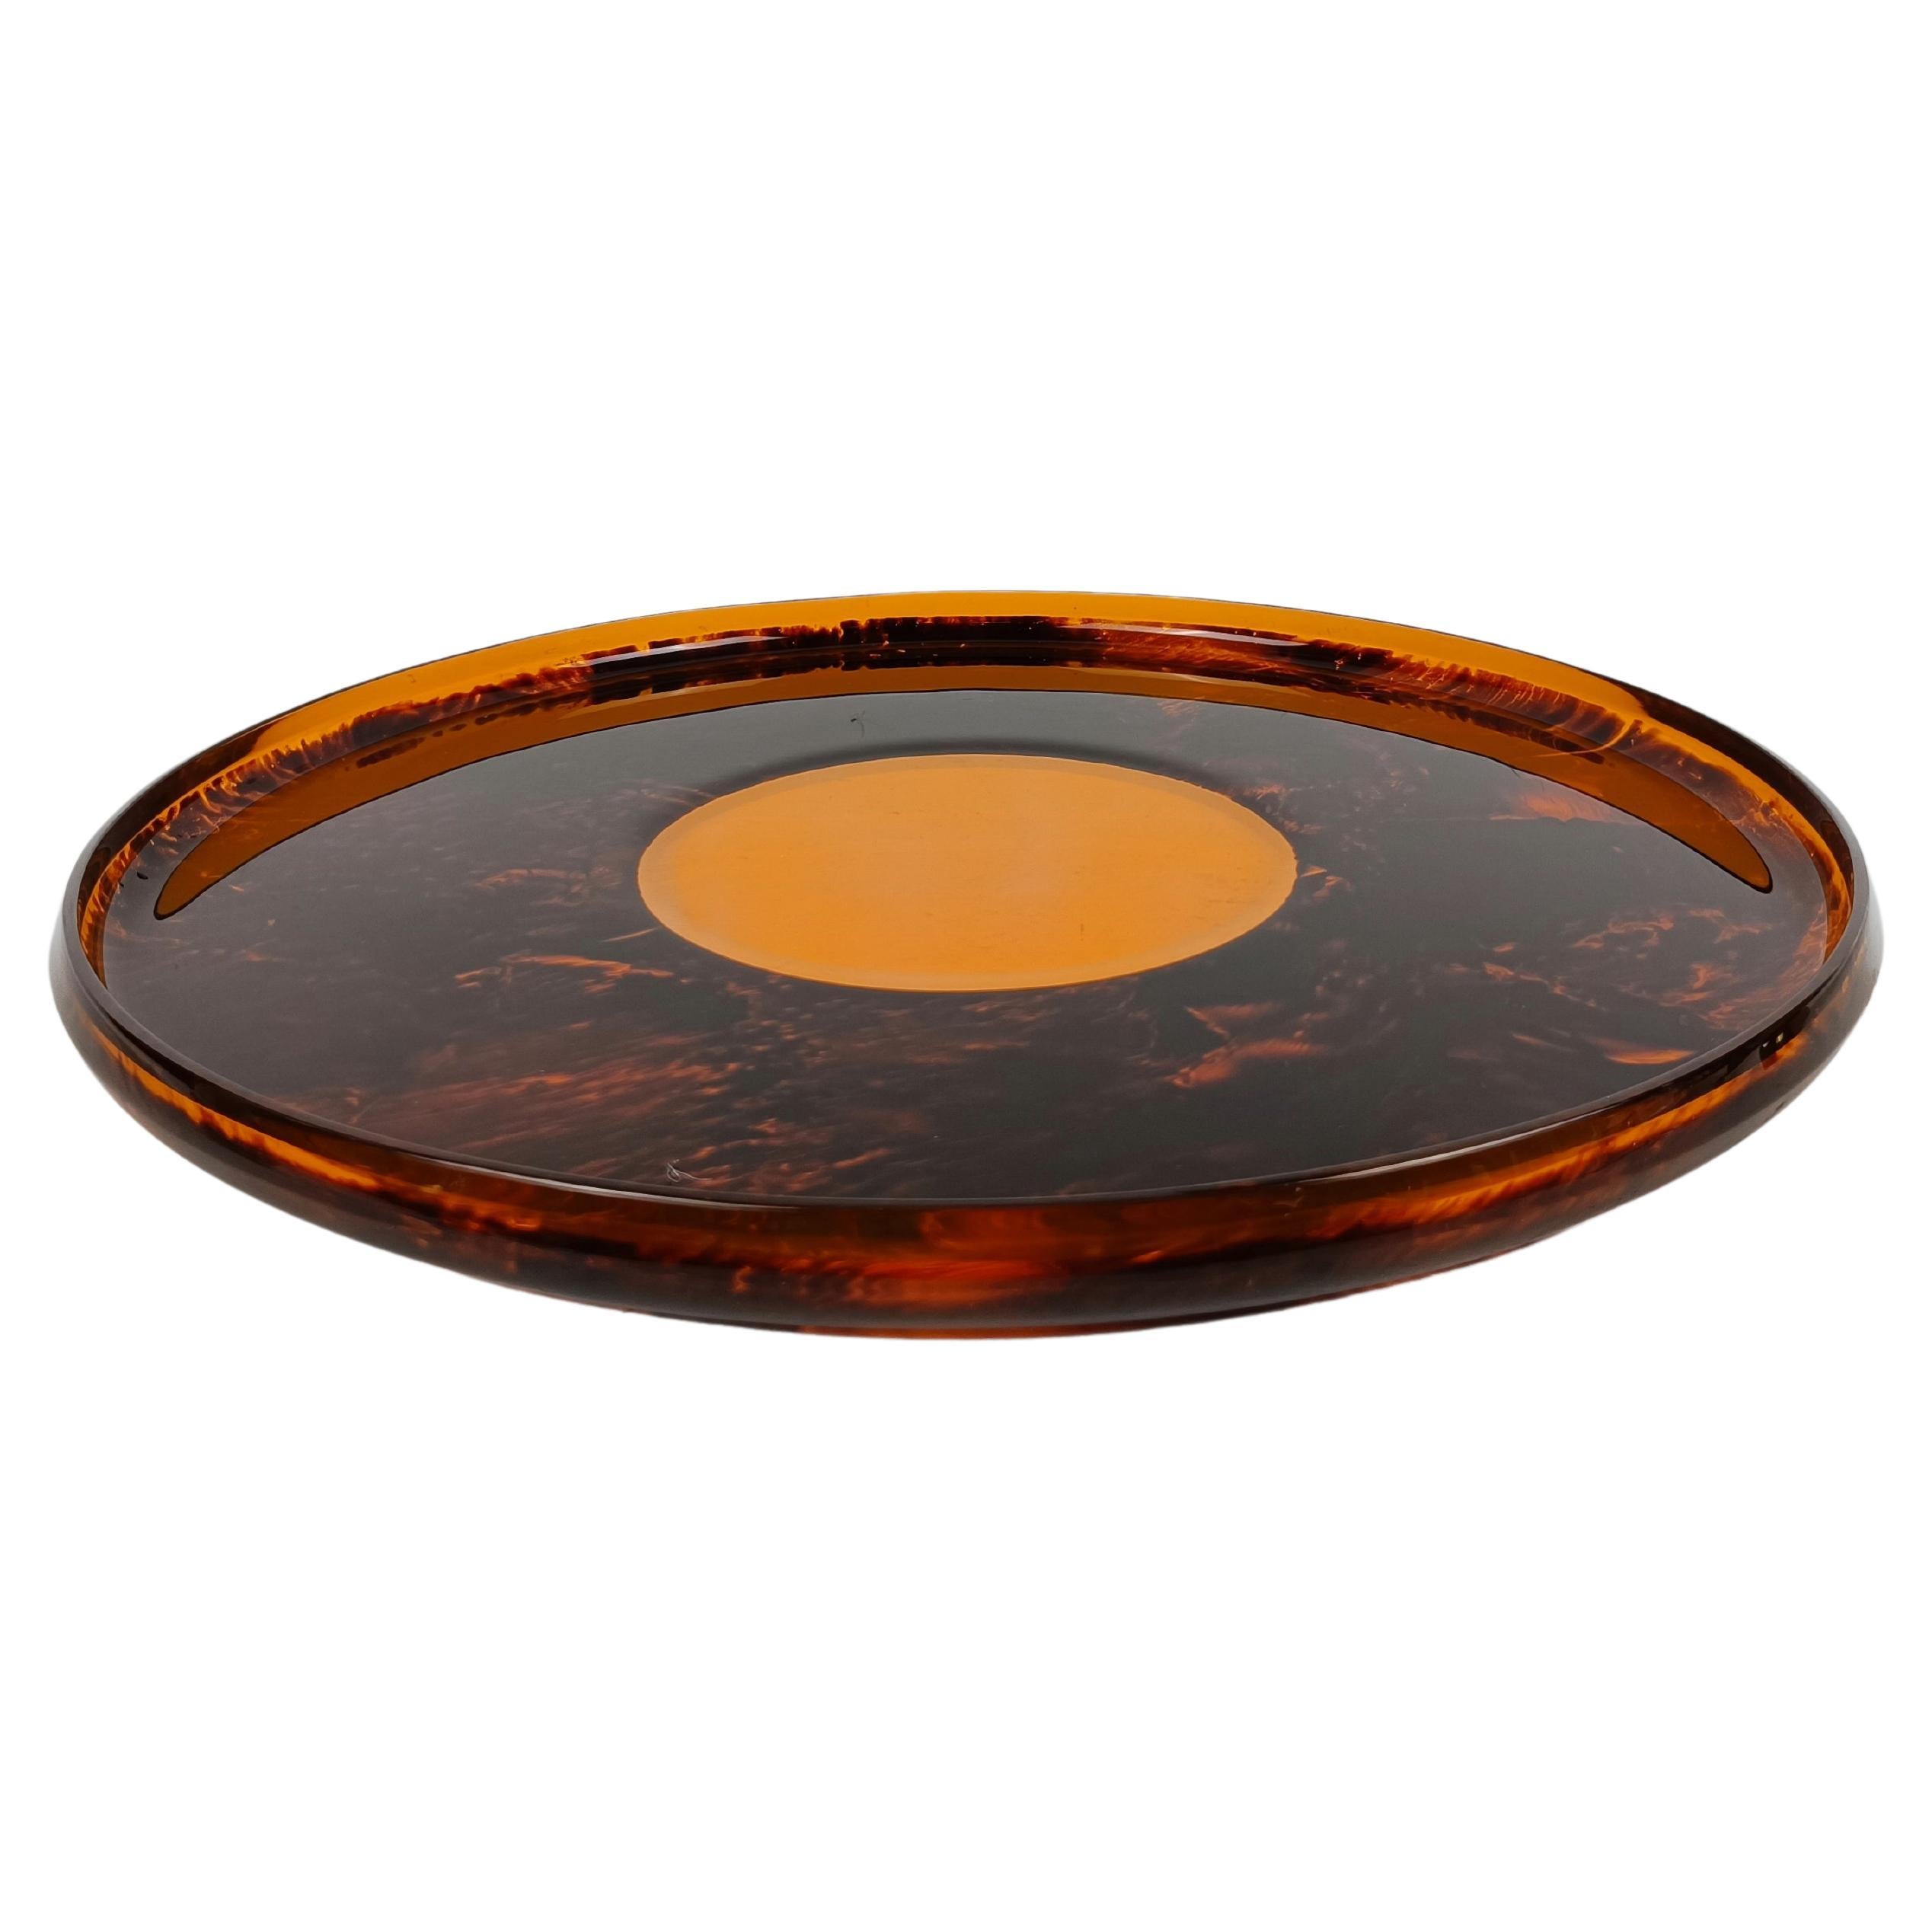 Italian 1970s Serving Round Tray in Indian Yellow Lucite and Faux Tortoiseshell  For Sale